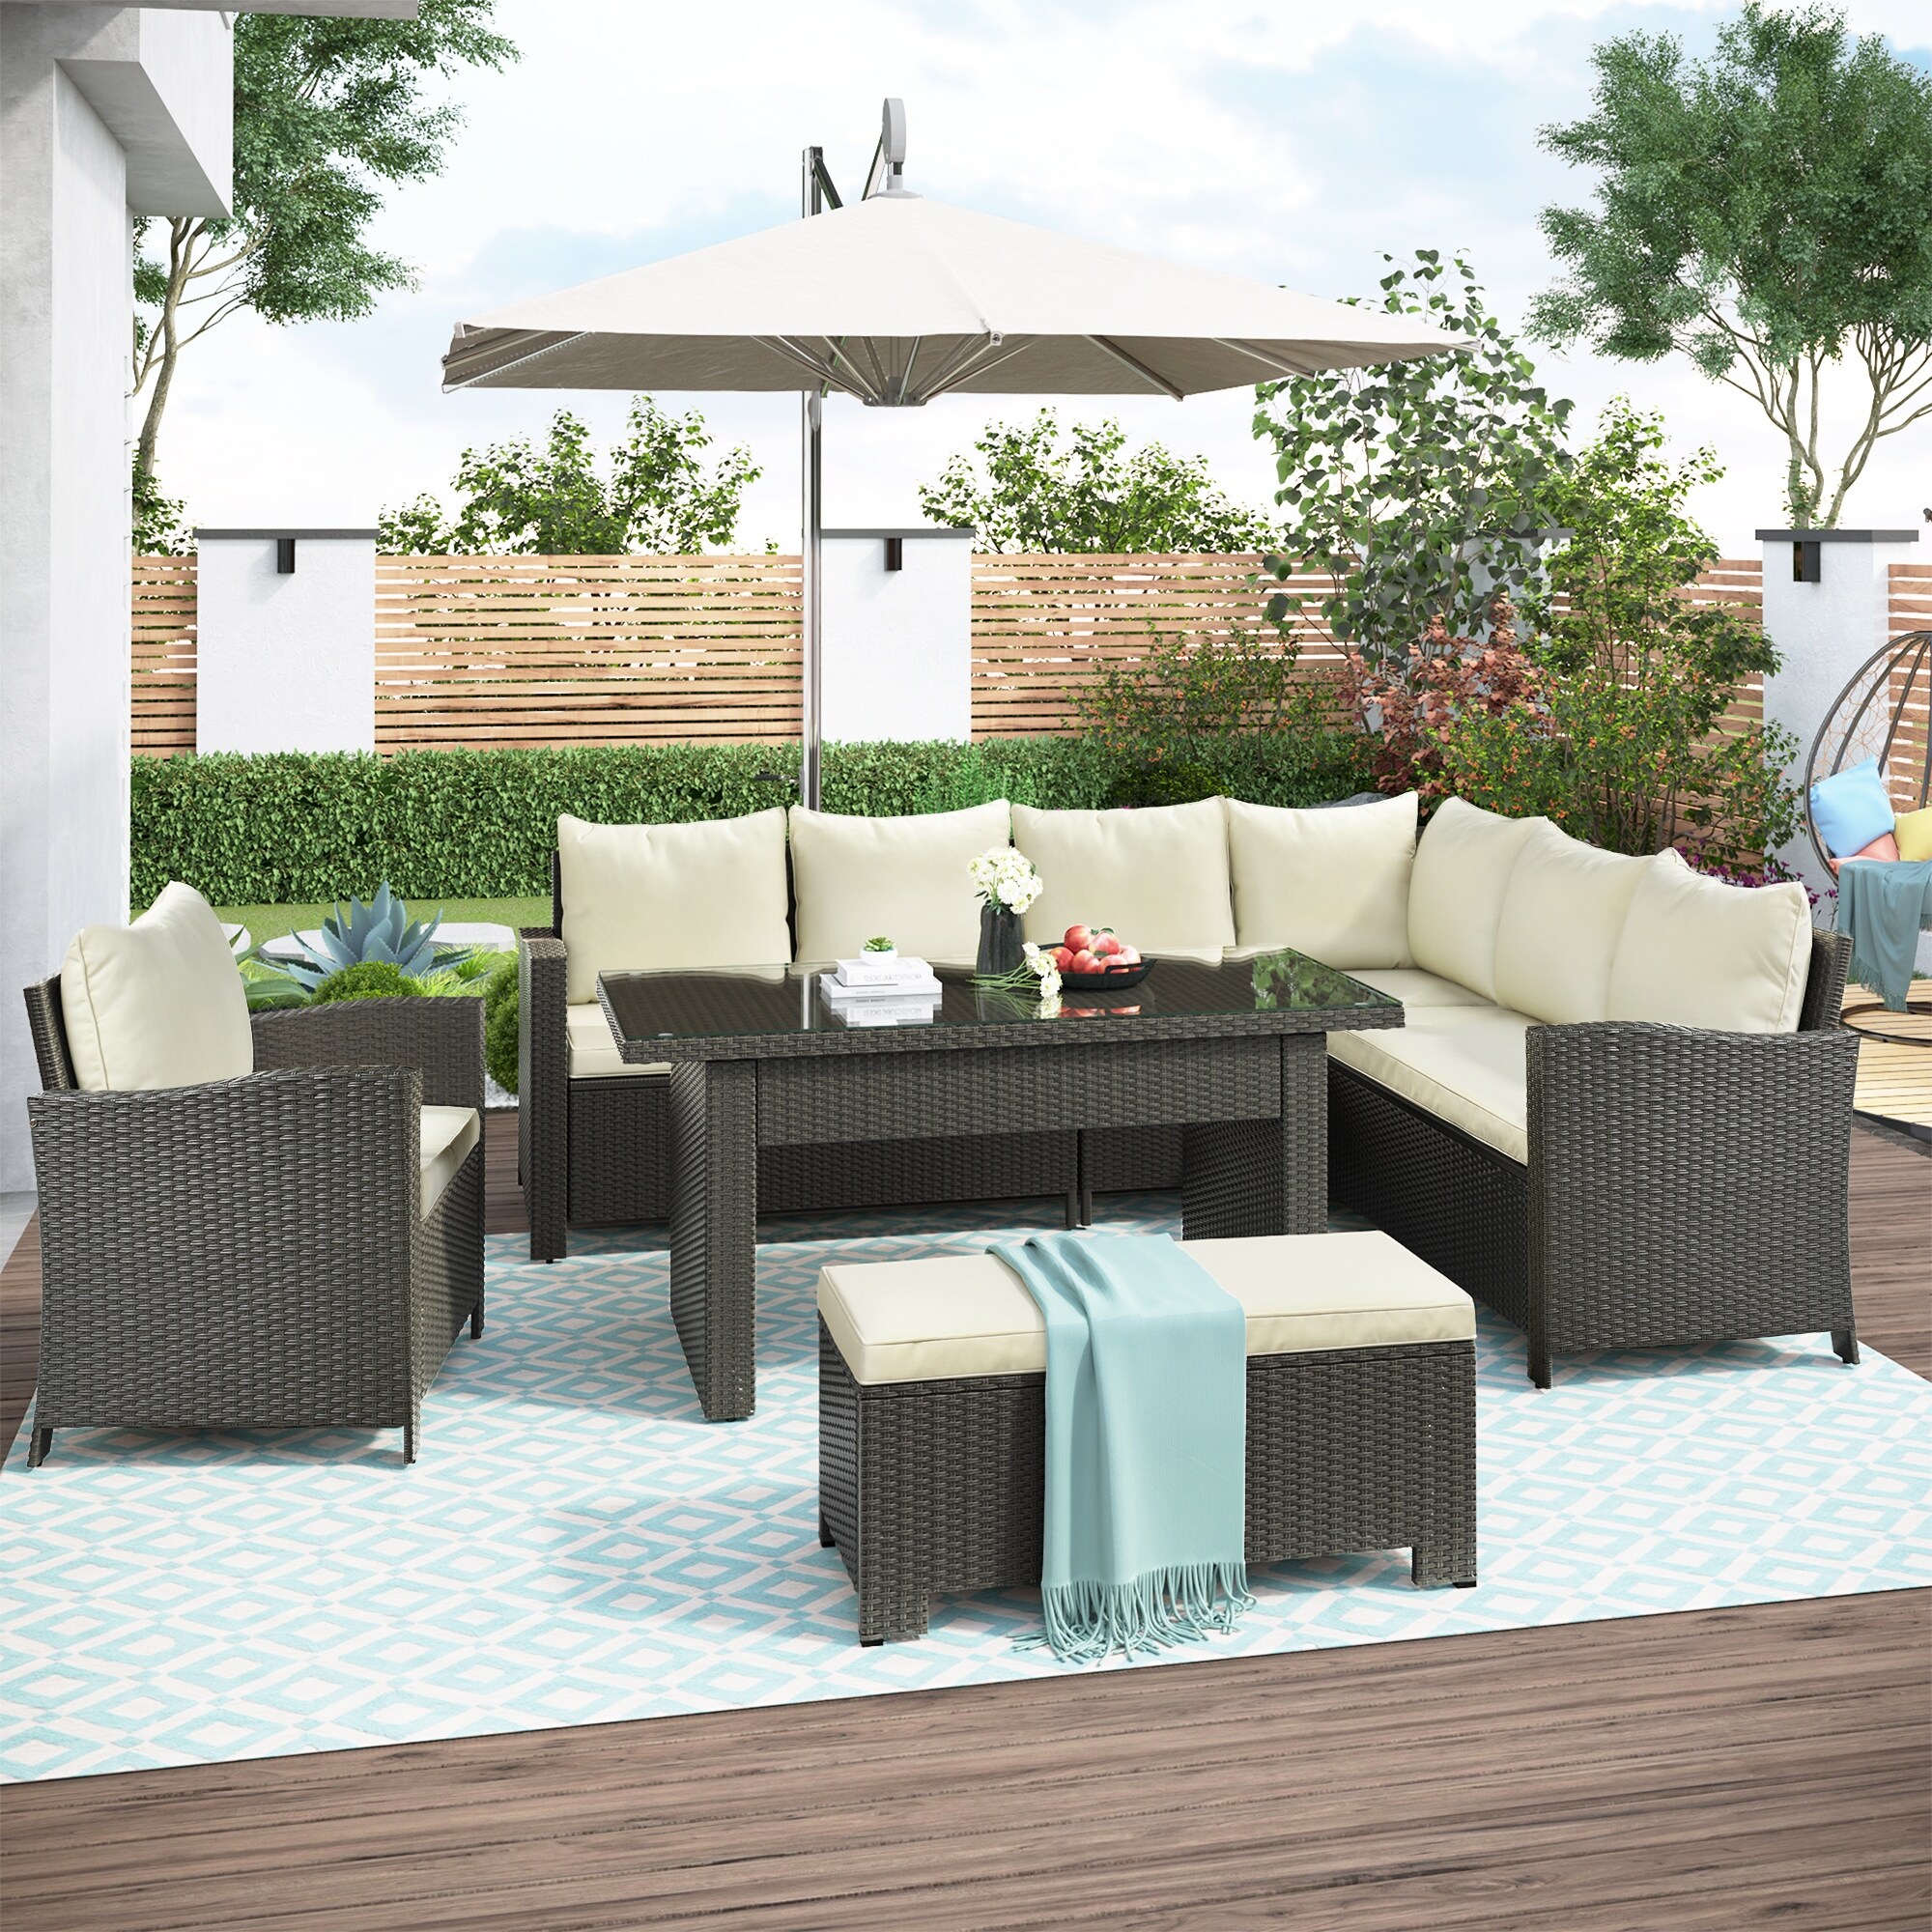 6 Piece Sectional Sofa Set Outdoor Conversation Set Dining Table Chair With Bench And Cushions For Swimming Pool